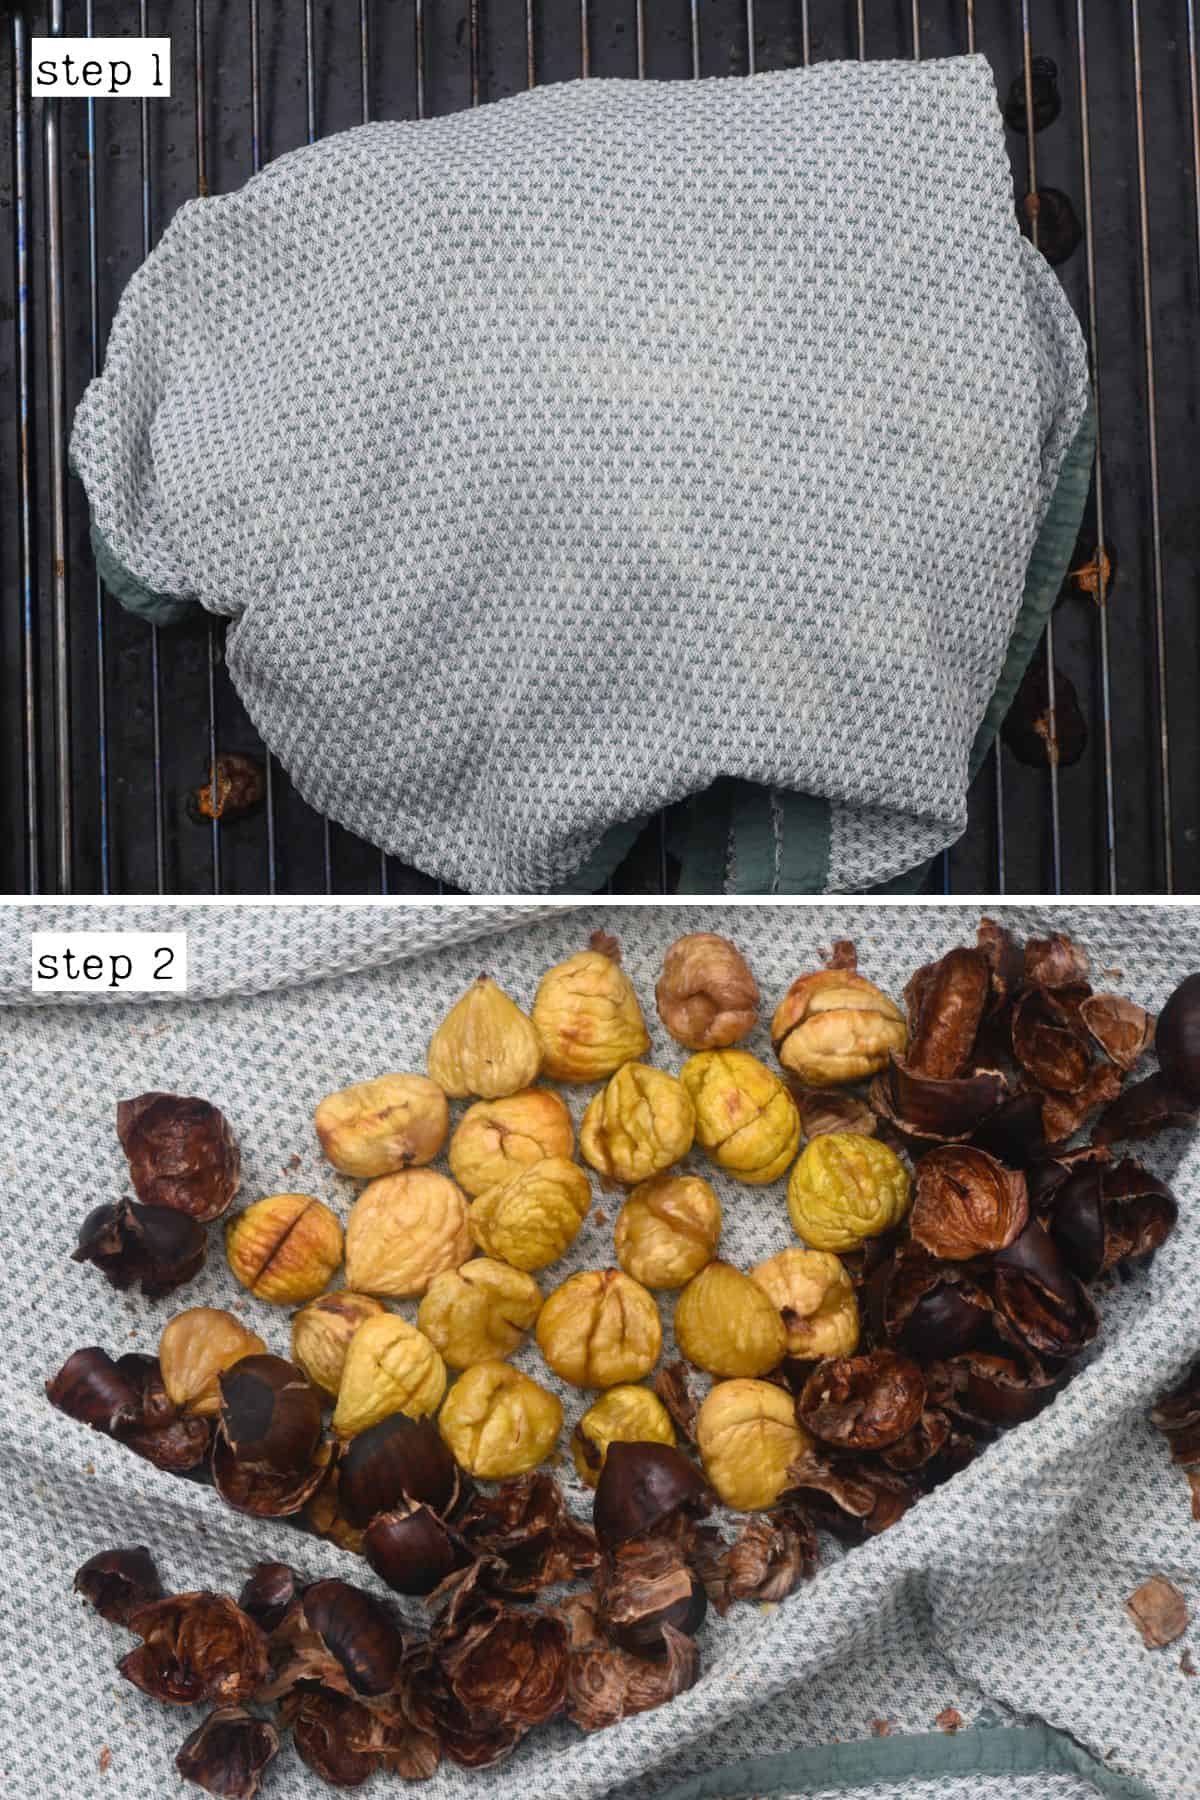 Steps for steaming chestnuts with a towel